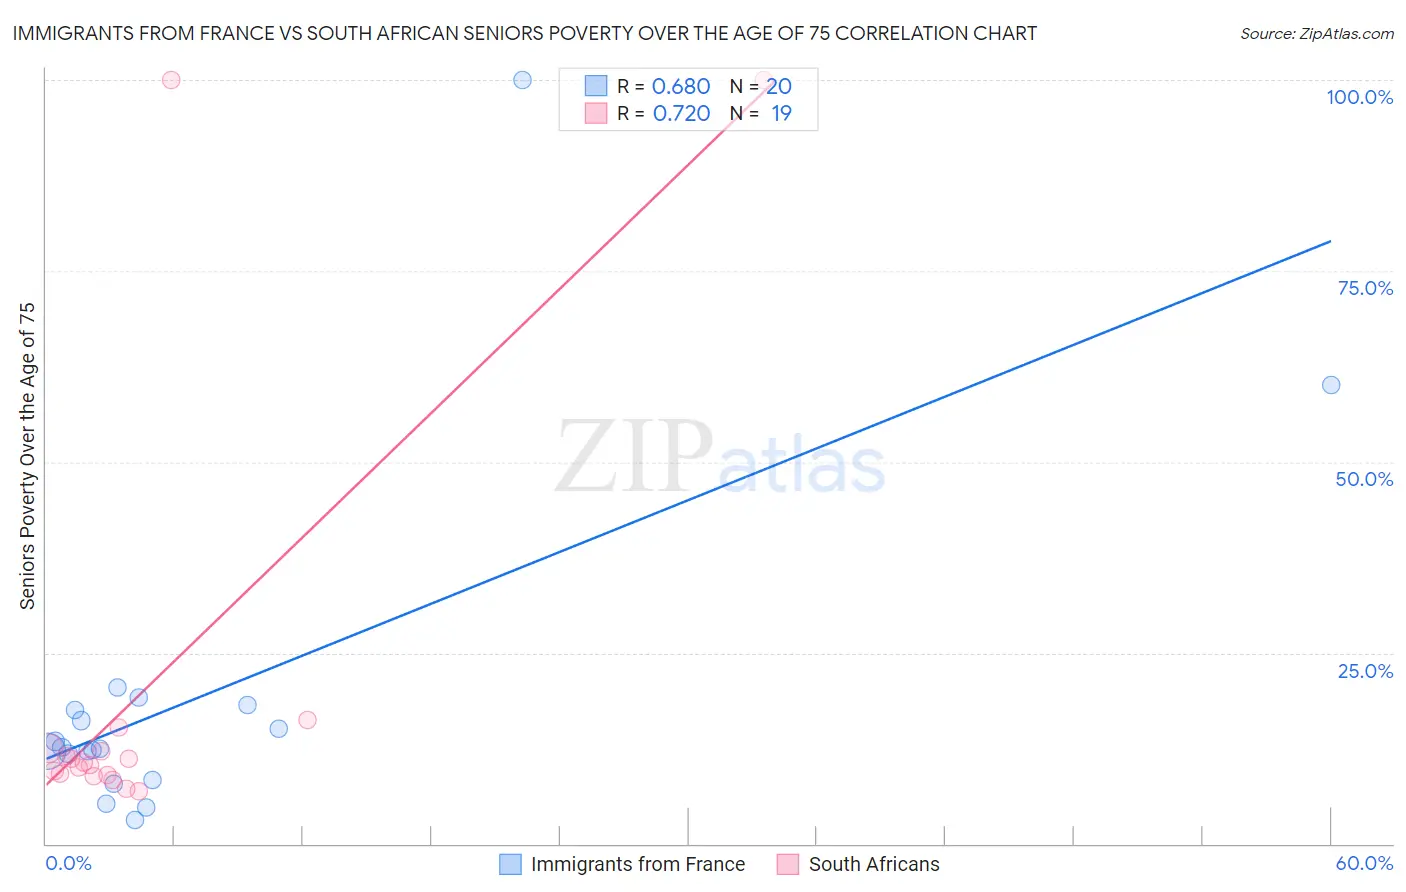 Immigrants from France vs South African Seniors Poverty Over the Age of 75